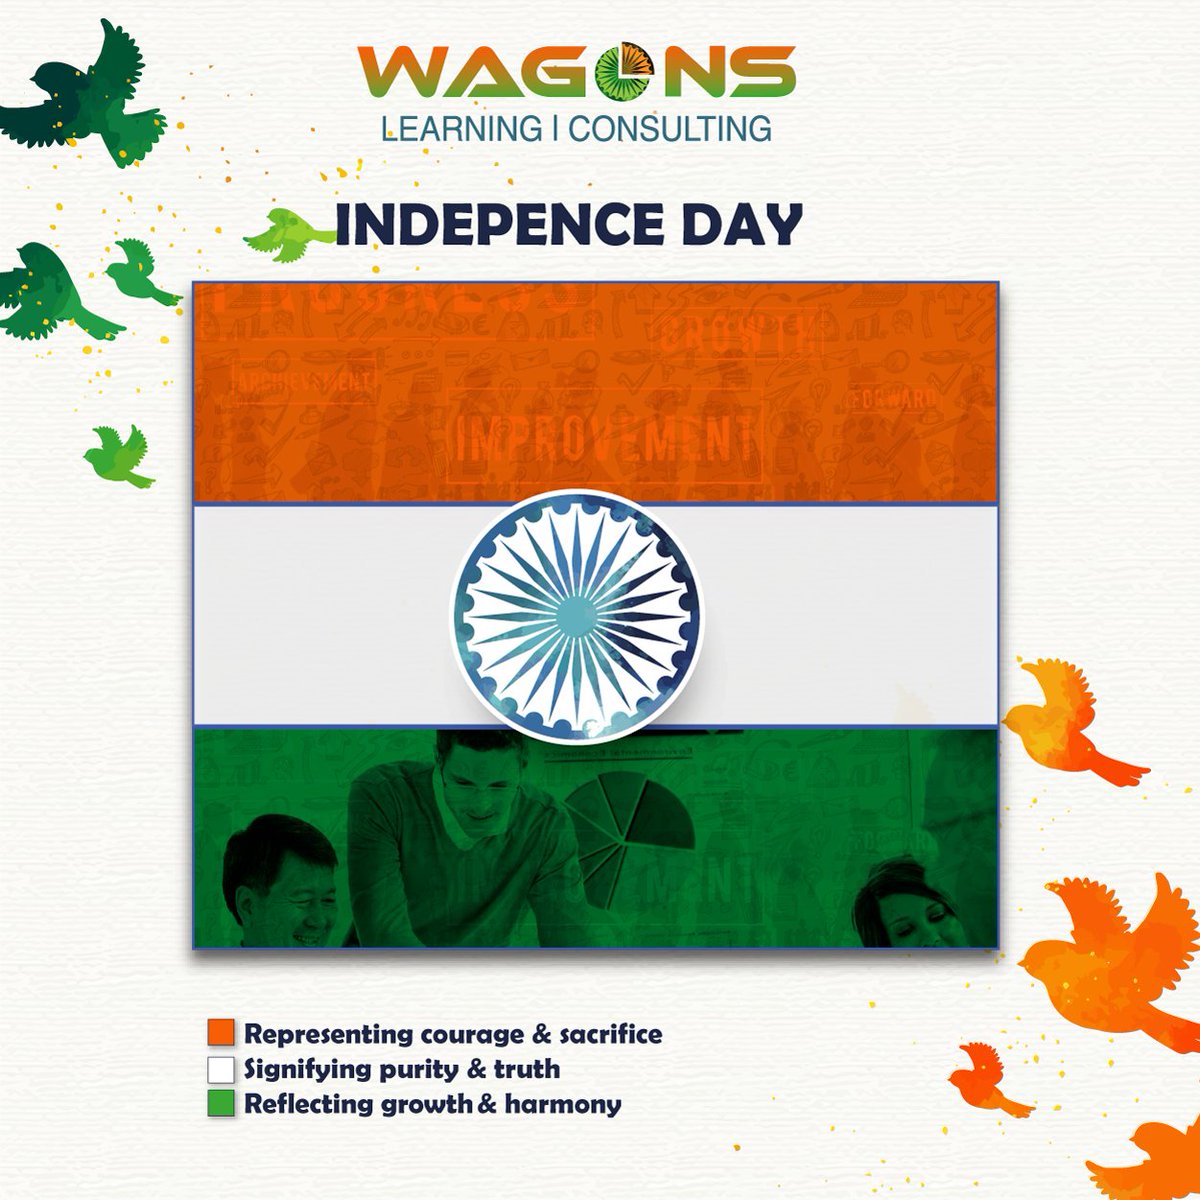 Celebrating freedom to learn and grow together. Happy Independence Day from our while team to you!🇮🇳
.
.
.
#independenceday #WagonsLearning #75thindependenceday #HappyIndependenceDay